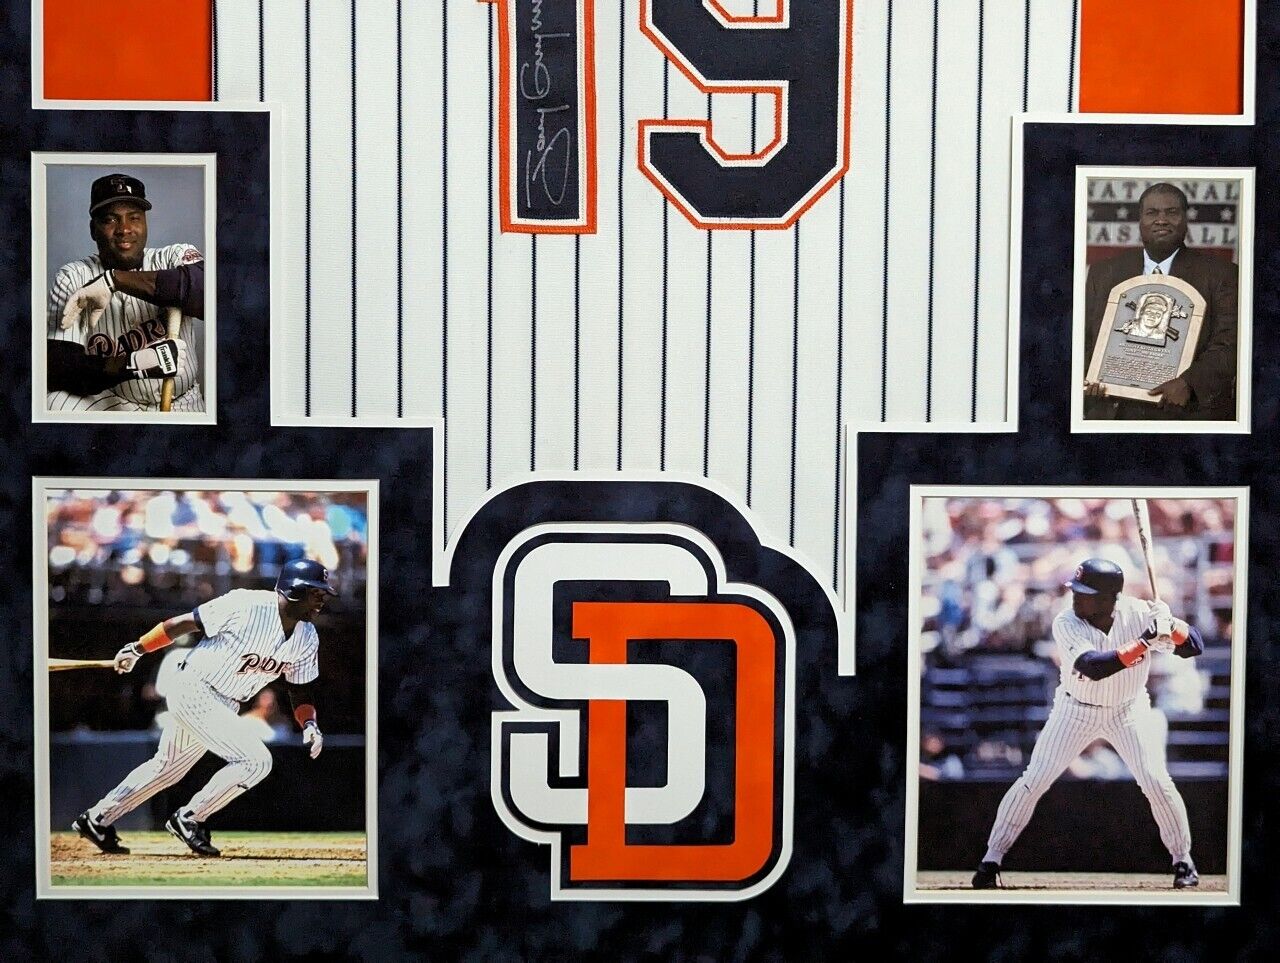 MVP Authentics Framed In Suede San Diego Padres Tony Gwynn Autographed Signed Jersey Jsa Coa 4950 sports jersey framing , jersey framing